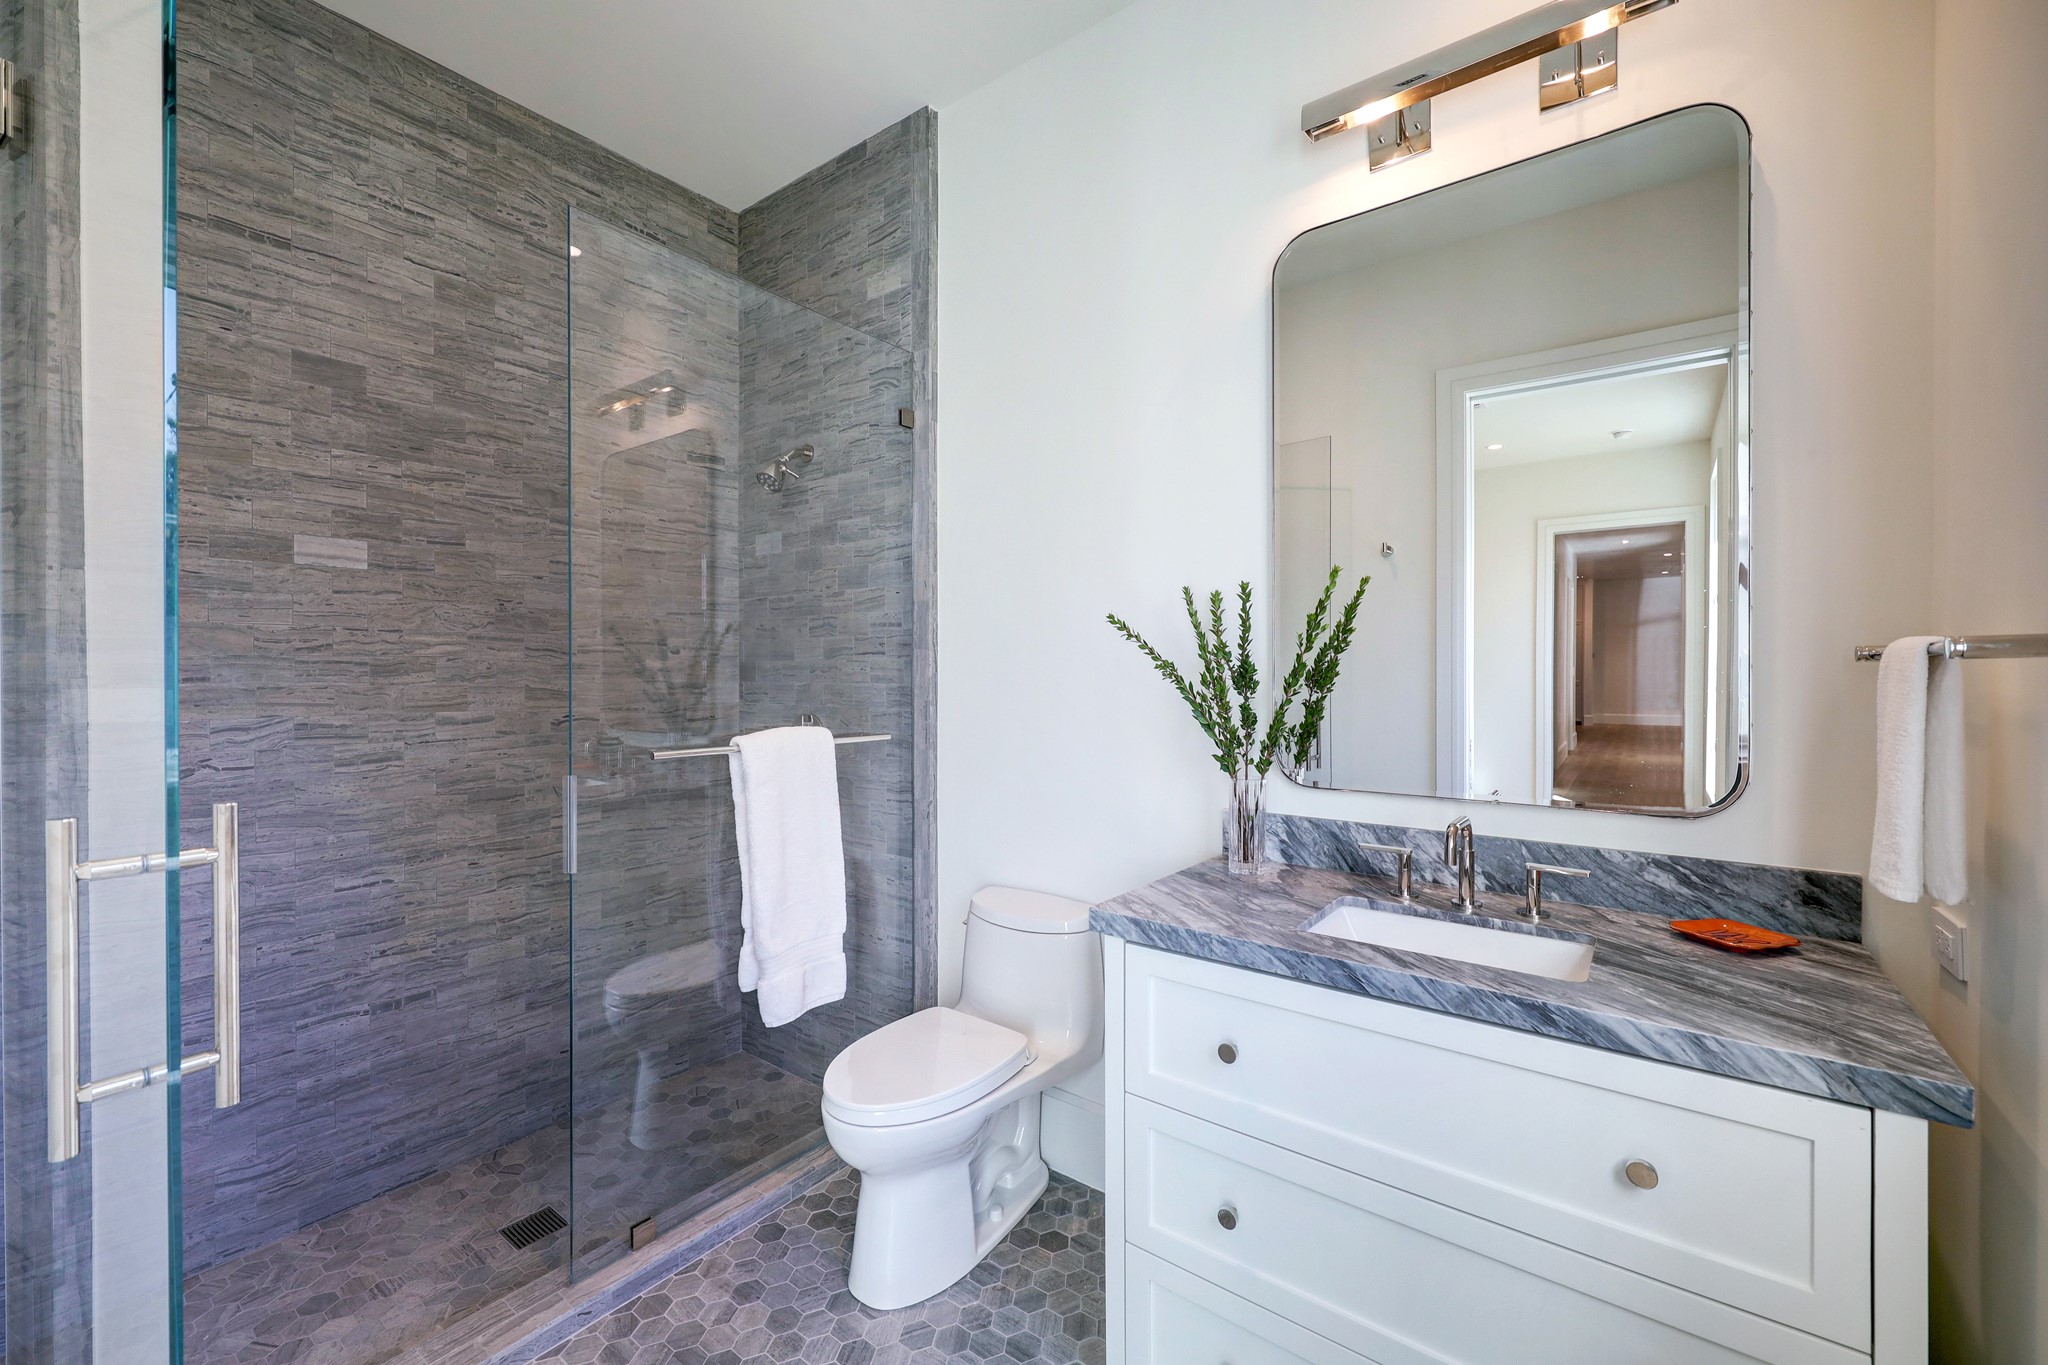 The secondary full bathrooms showcase floor-to-ceiling backsplash, a seamless glass enclosure, and custom mosaic tile for a distinctive touch.